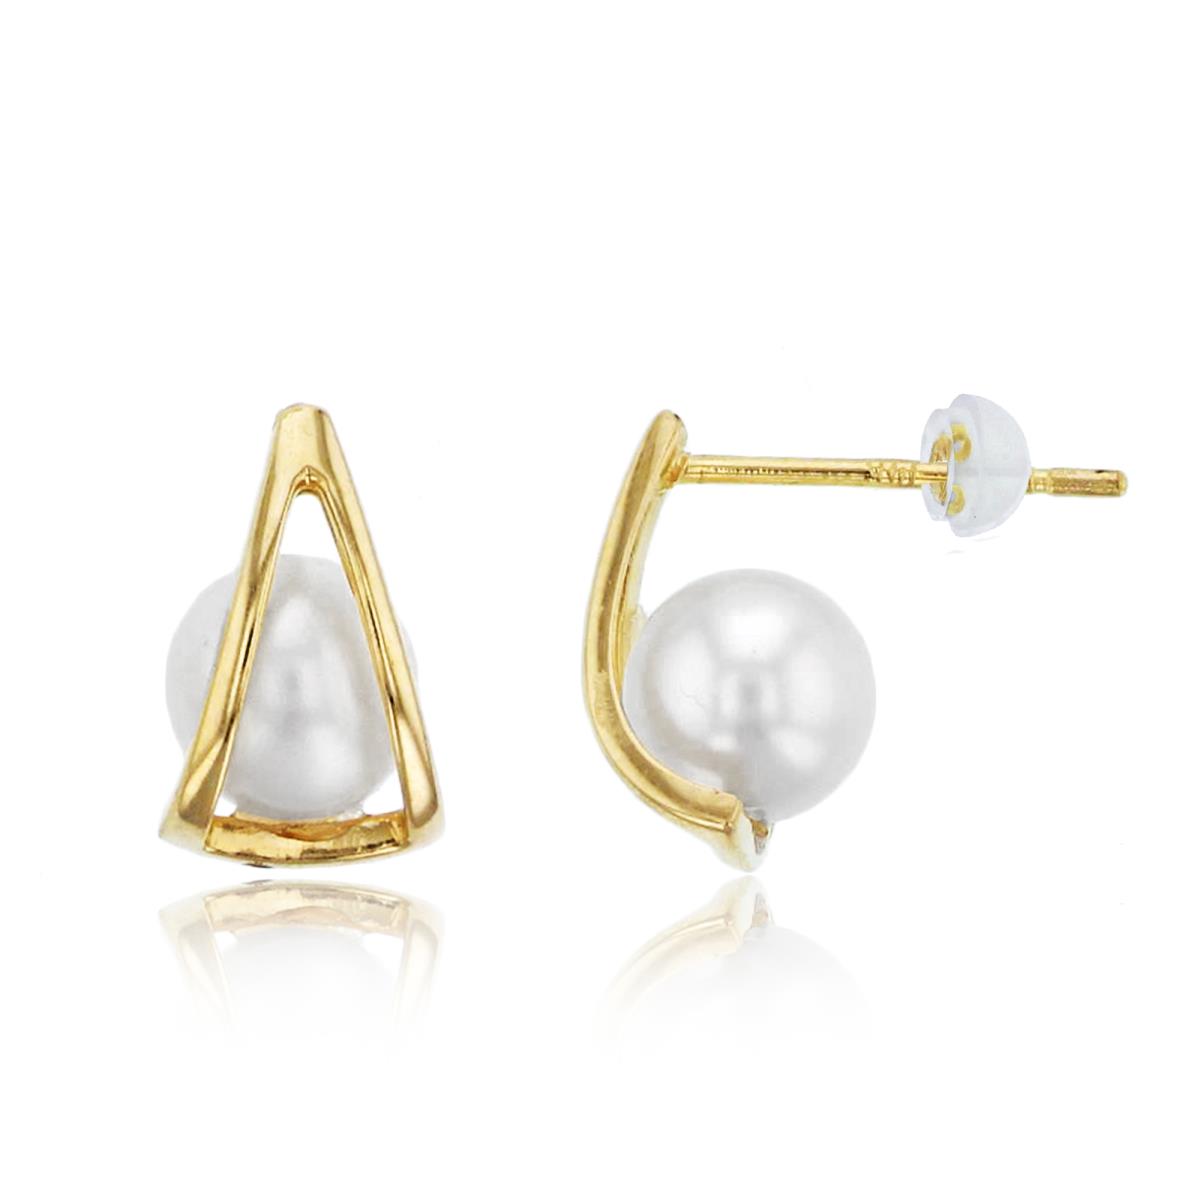 10K Yellow Gold 5mm Rnd Fresh Water Pearl Studs with Silicon Backs